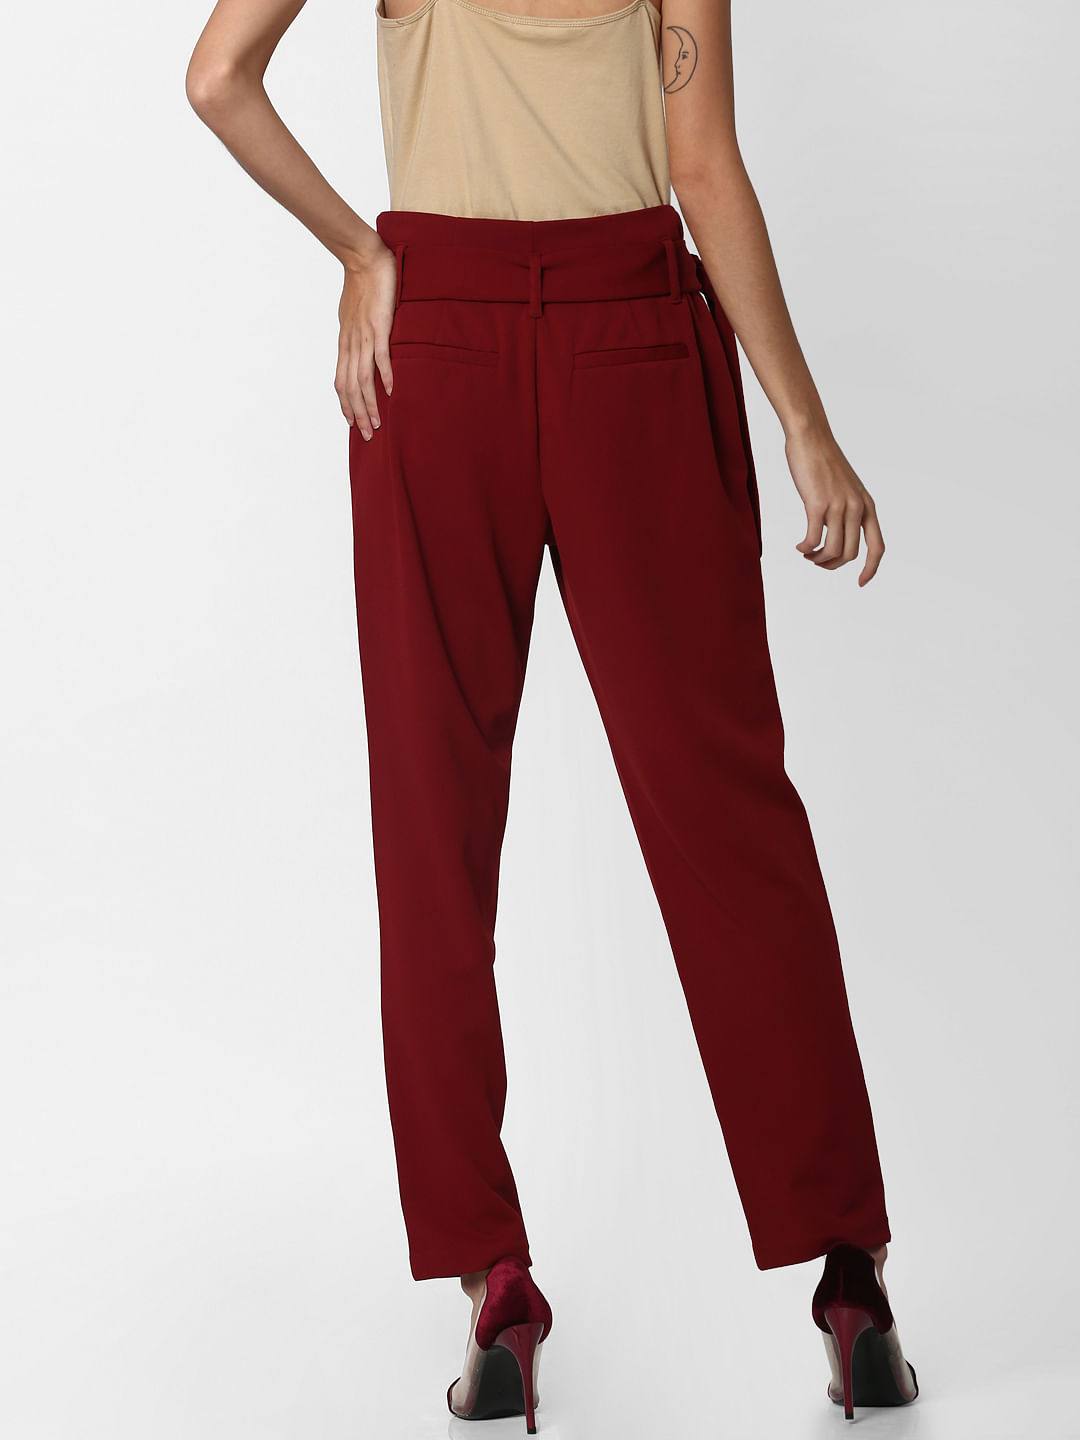 high rise red pants